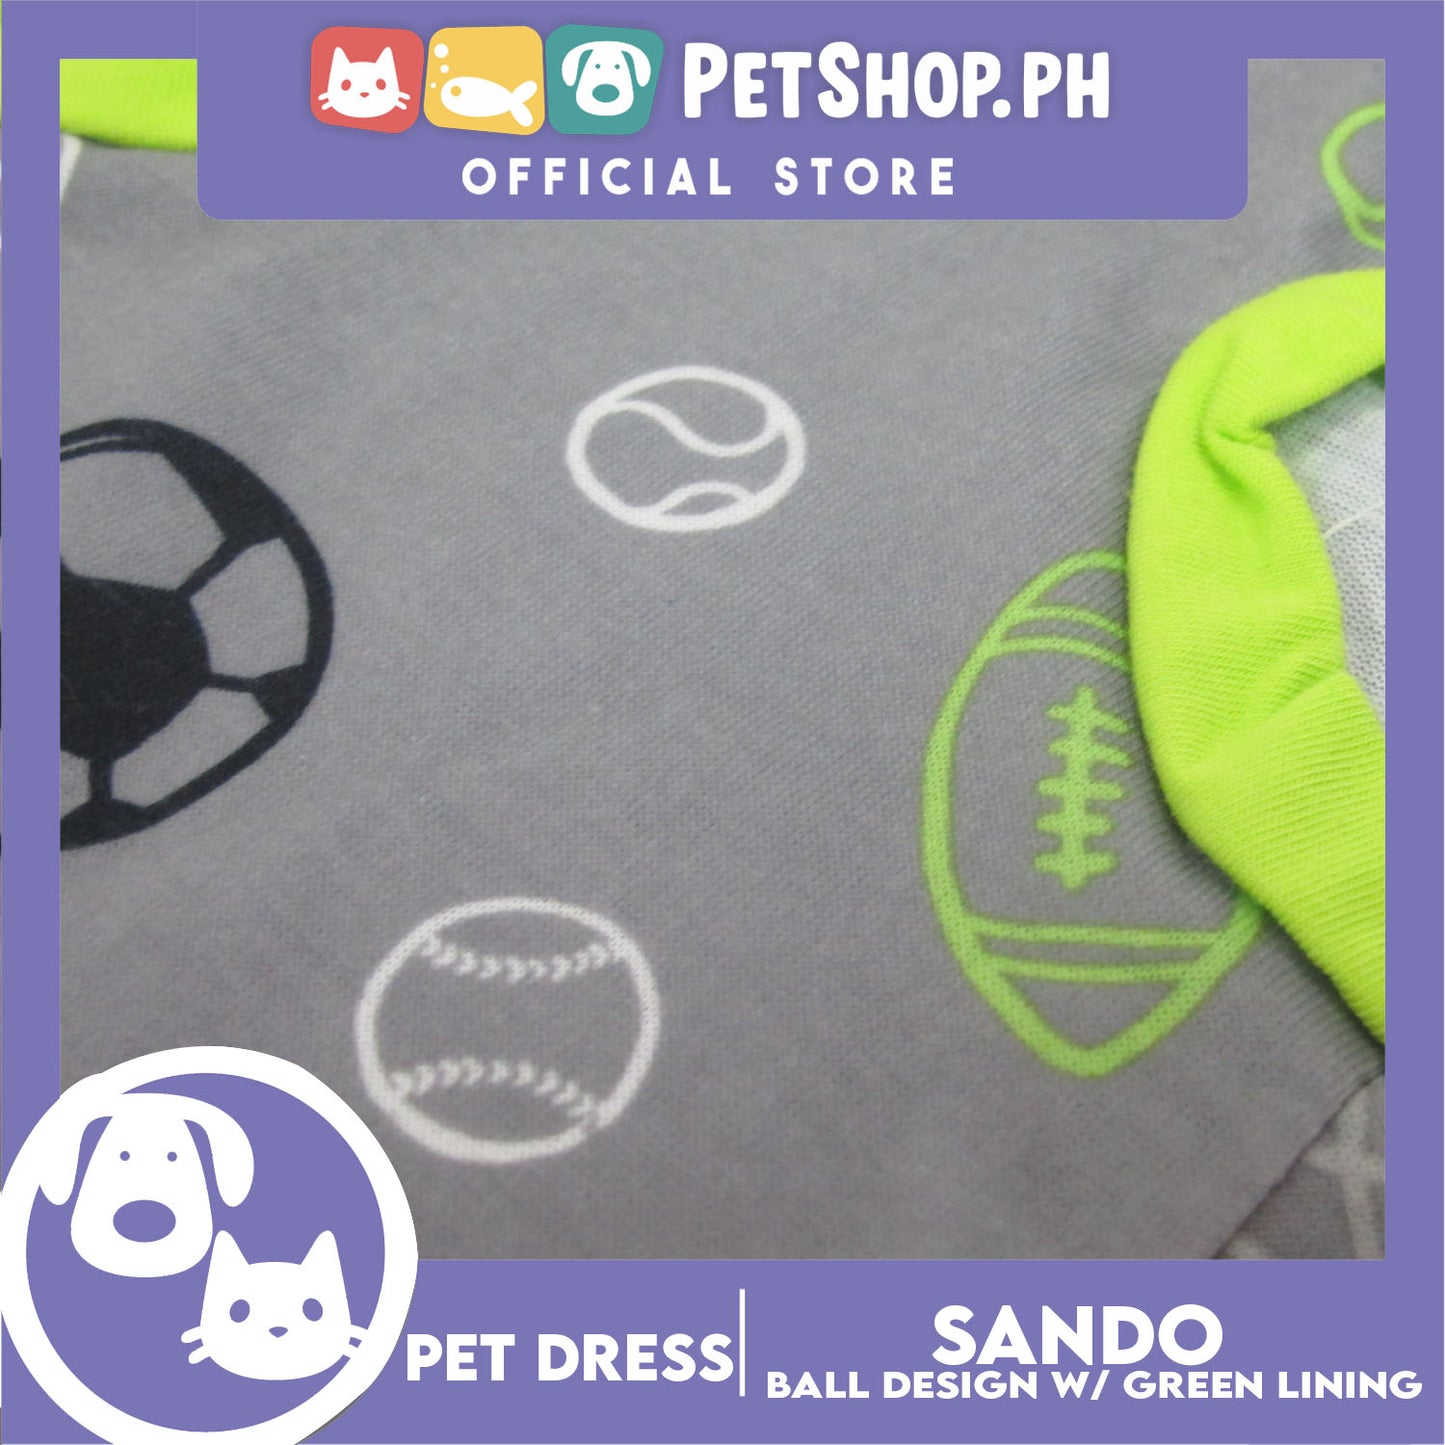 Pet Sando Gray with Soccer Print White Piping (Large Size) for Small Dog- Pet Sport Clothes